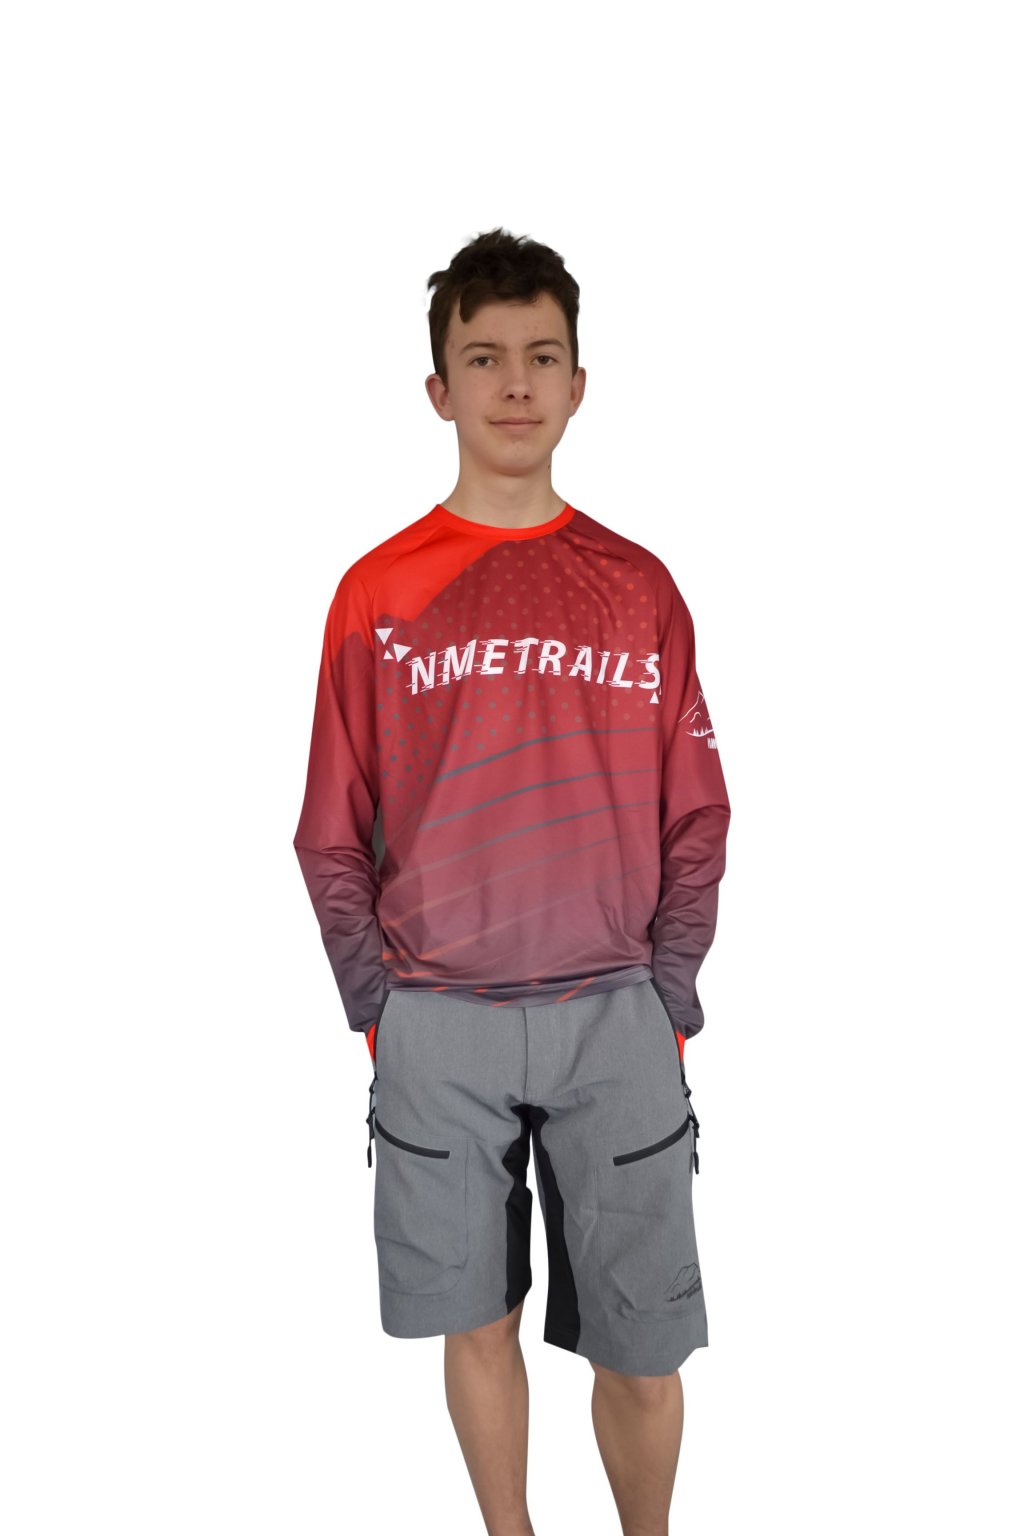 Red and Grey Jersey.jpg